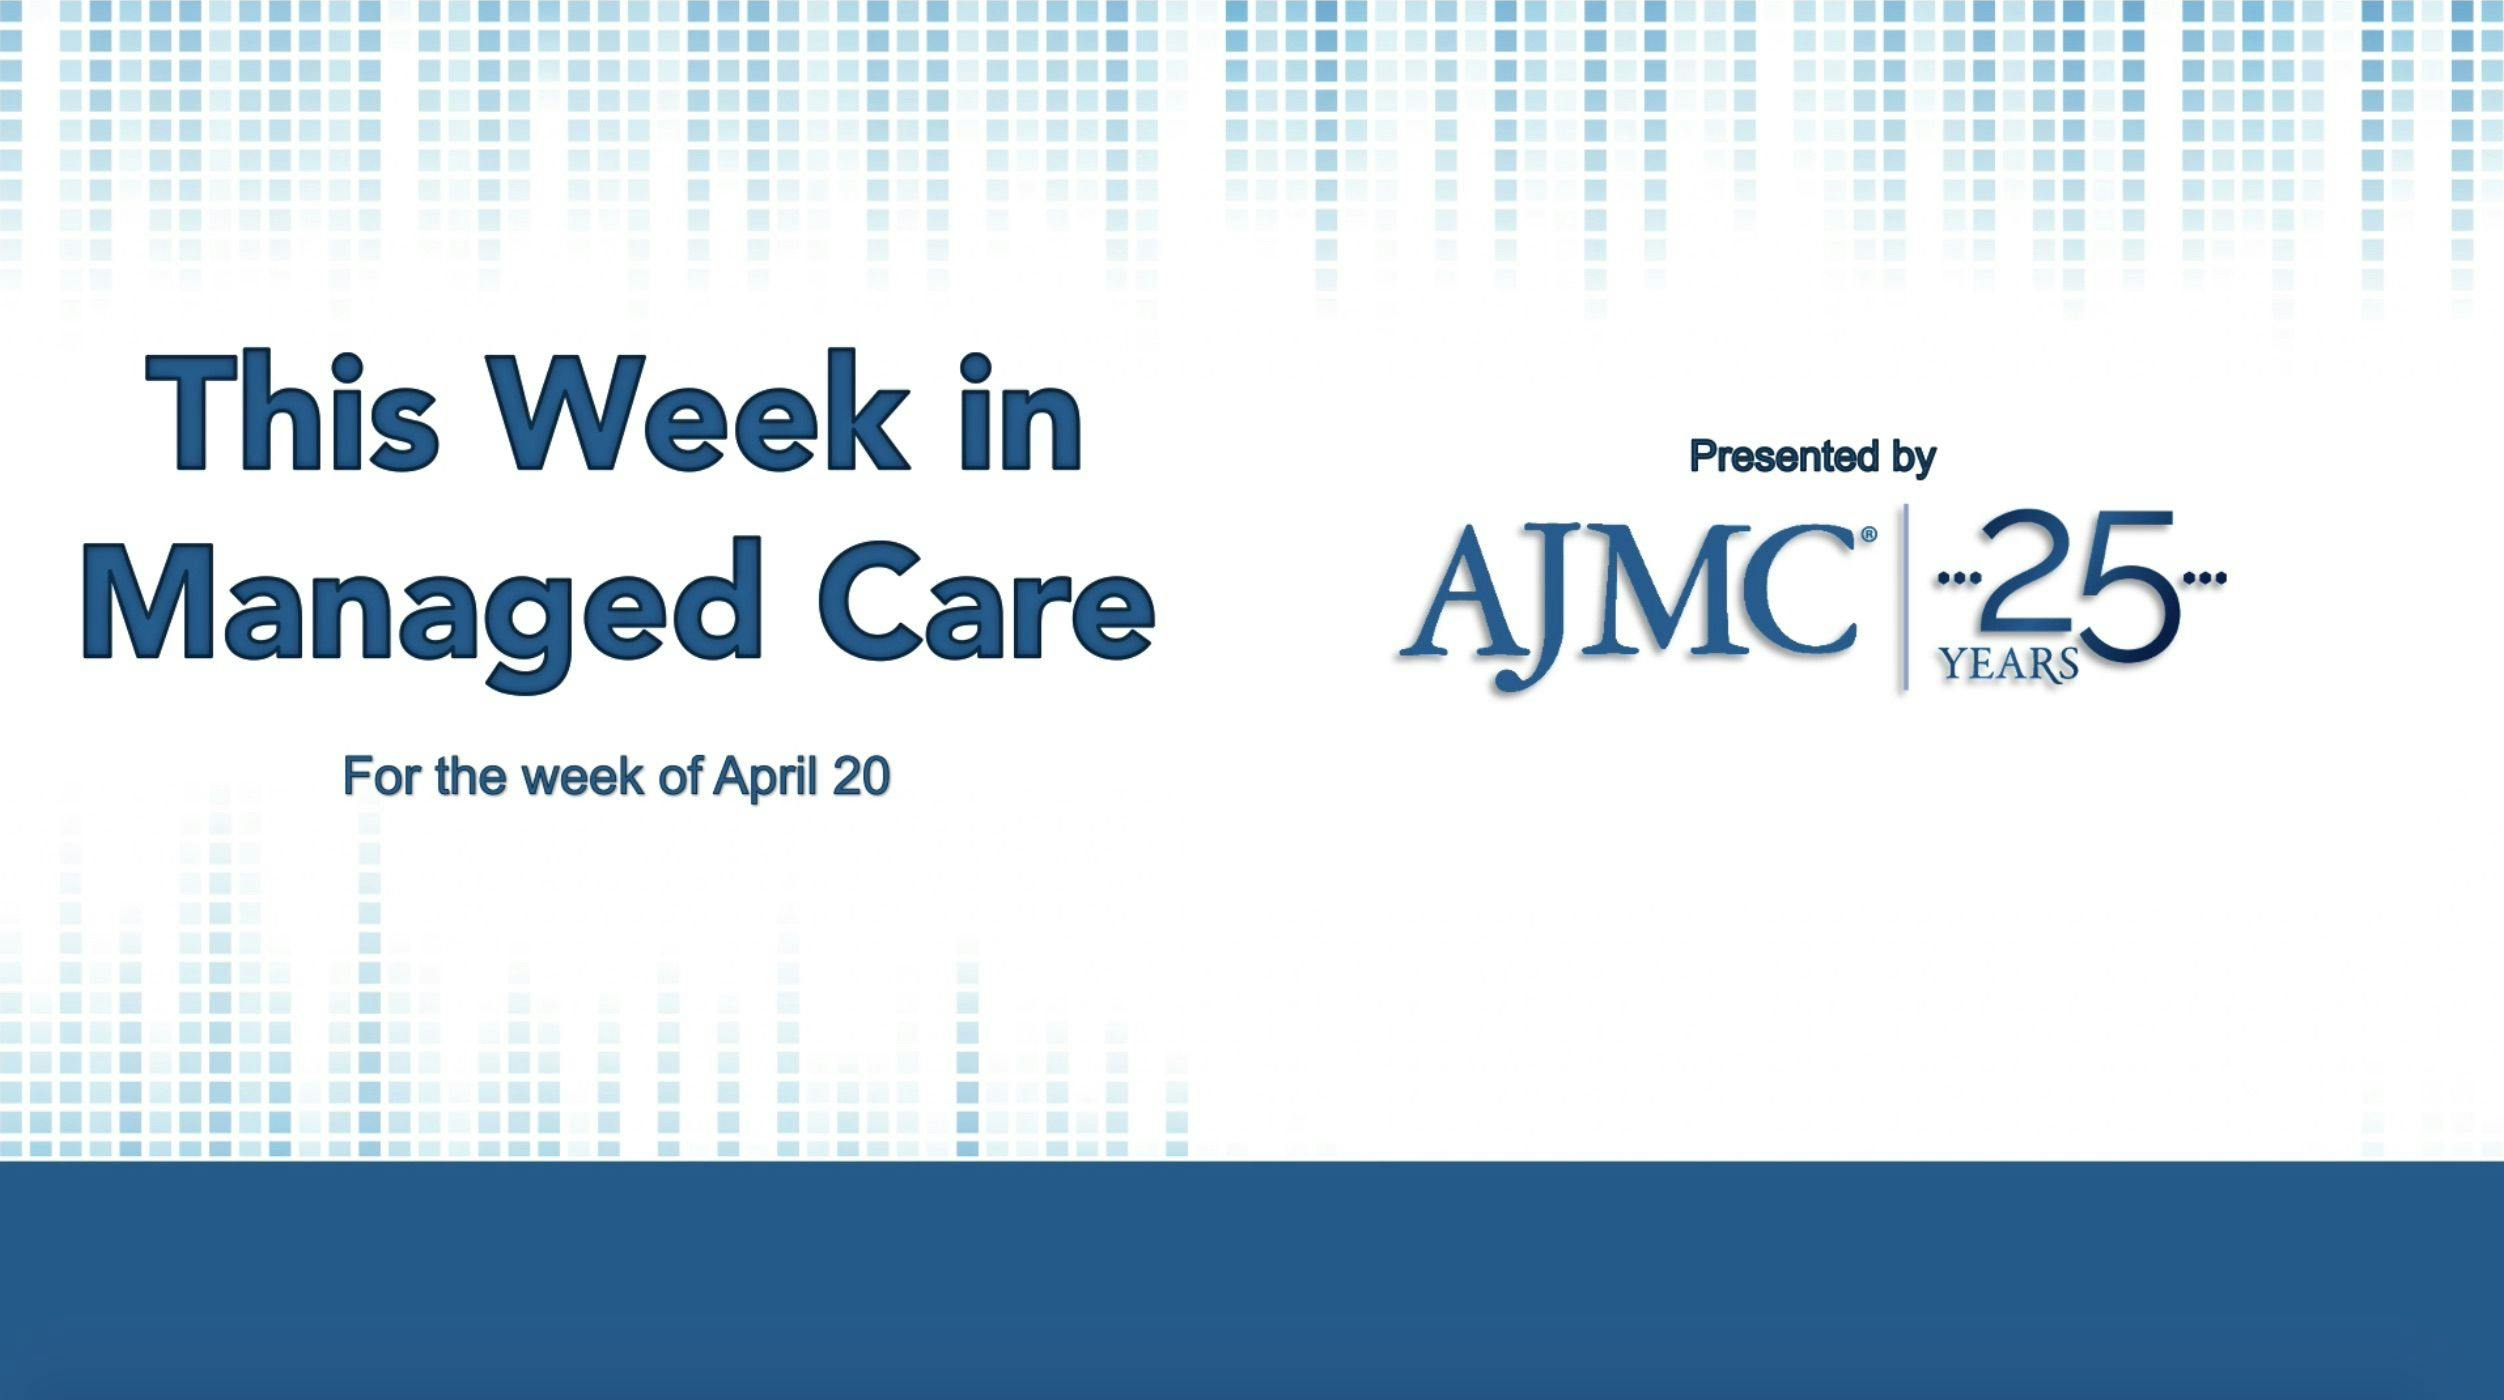 This Week in Managed Care: April 24, 2020